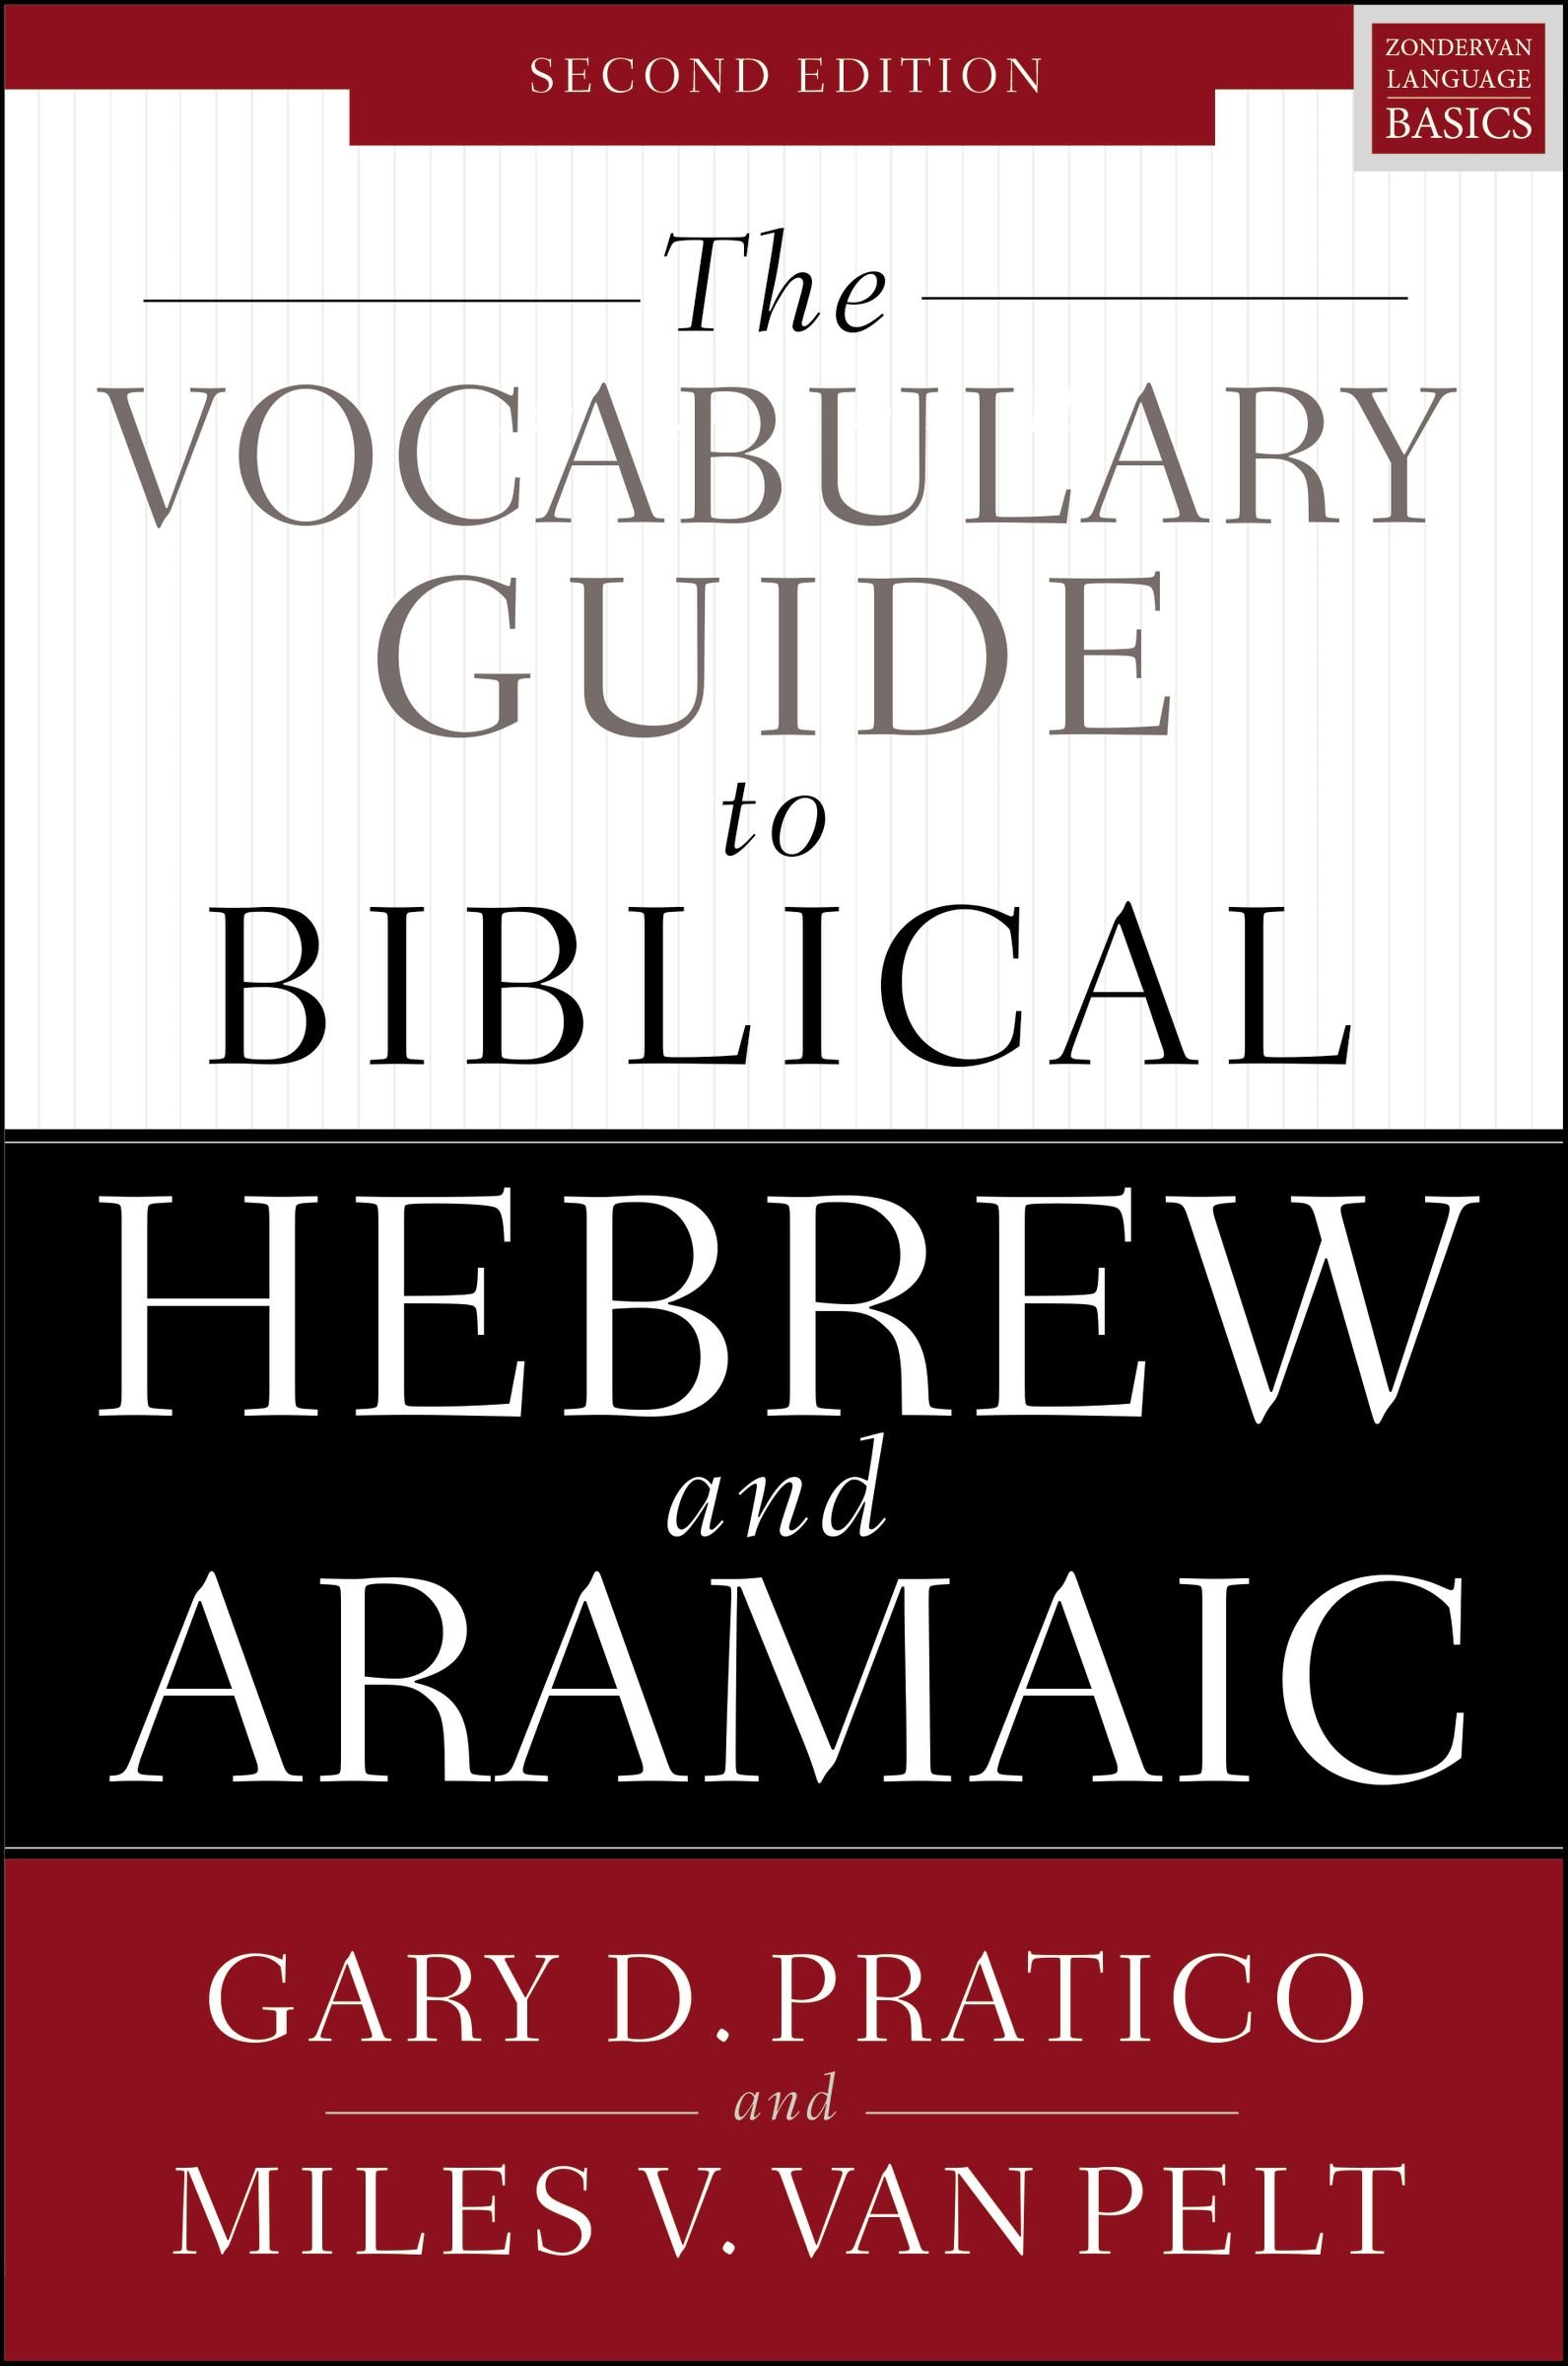 Book Notice: THE VOCABULARY GUIDE TO BIBLICAL HEBREW AND ARAMAIC: SECOND EDITION, by Gary D. Pratico and Miles V. Van Pelt